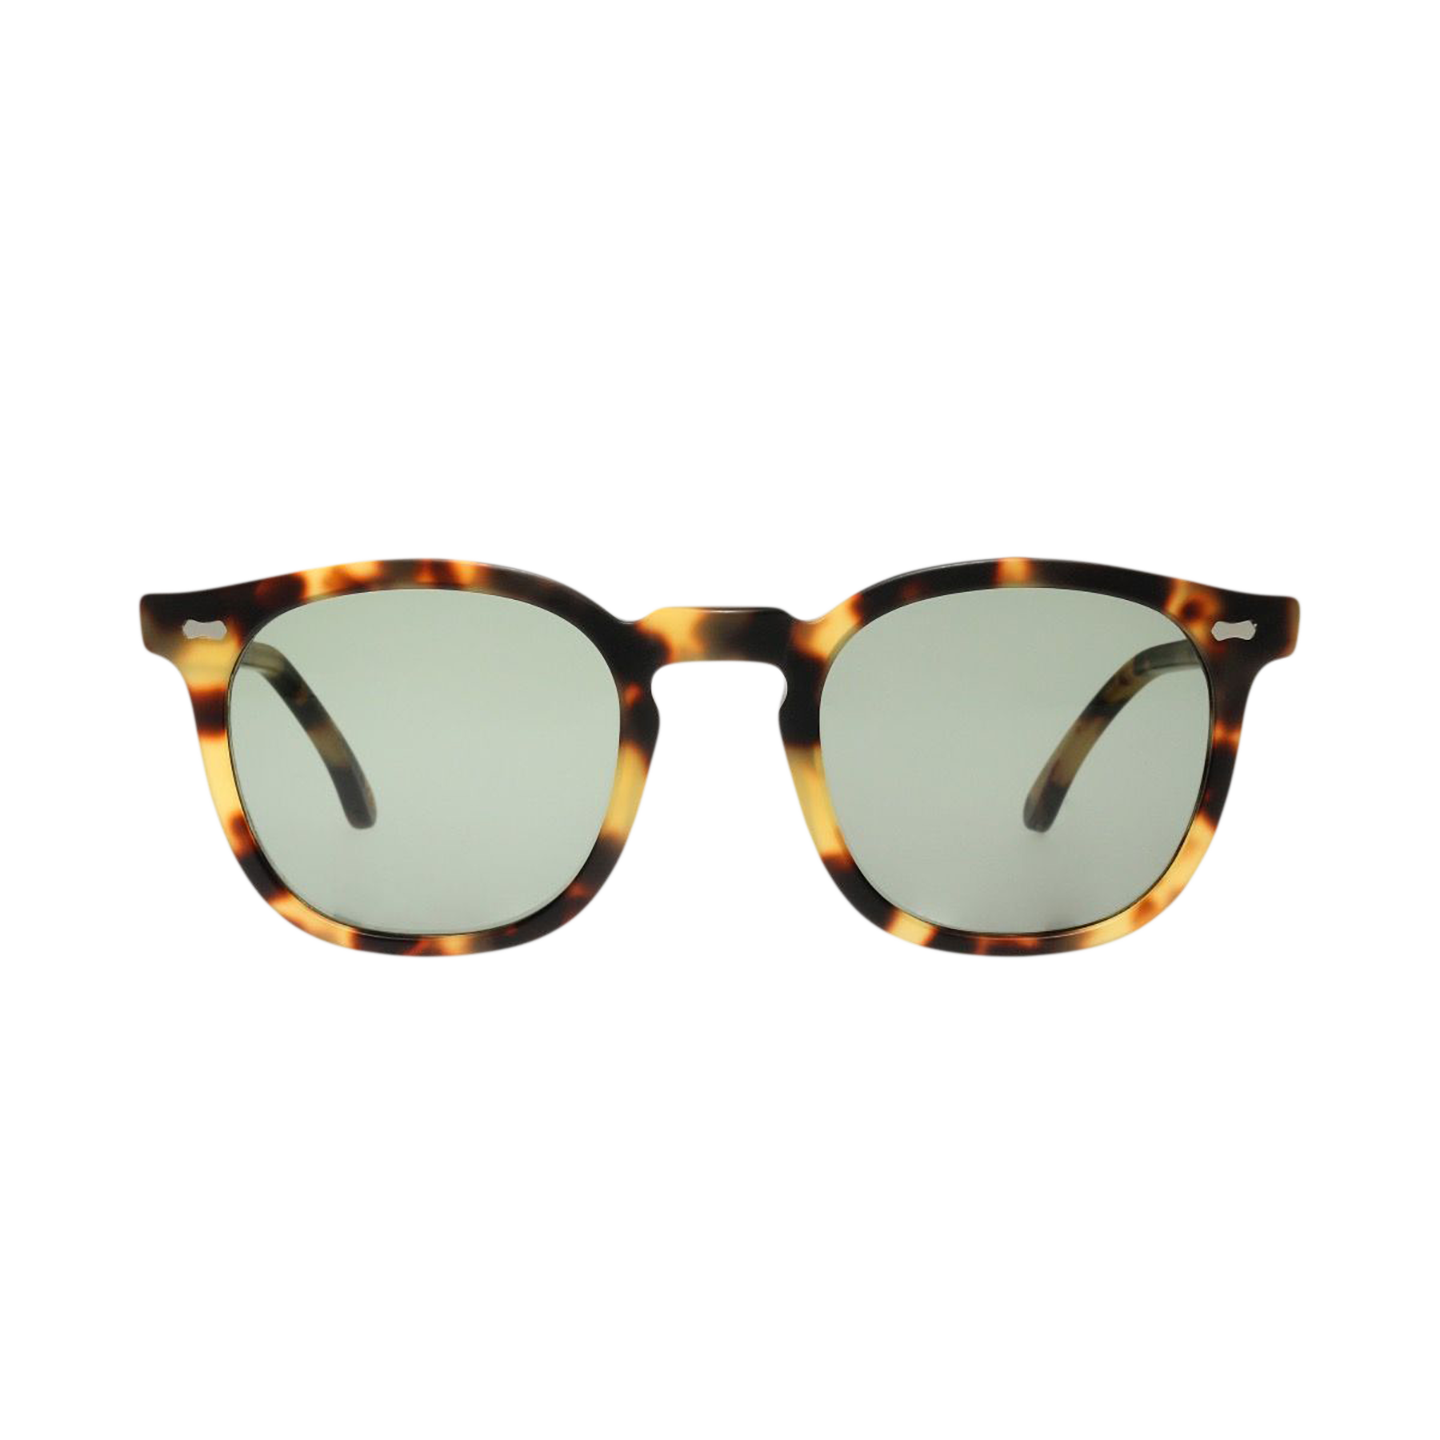 A pair of handmade Twill Light Tortoise sunglasses by The Bespoke Dudes on a white background.